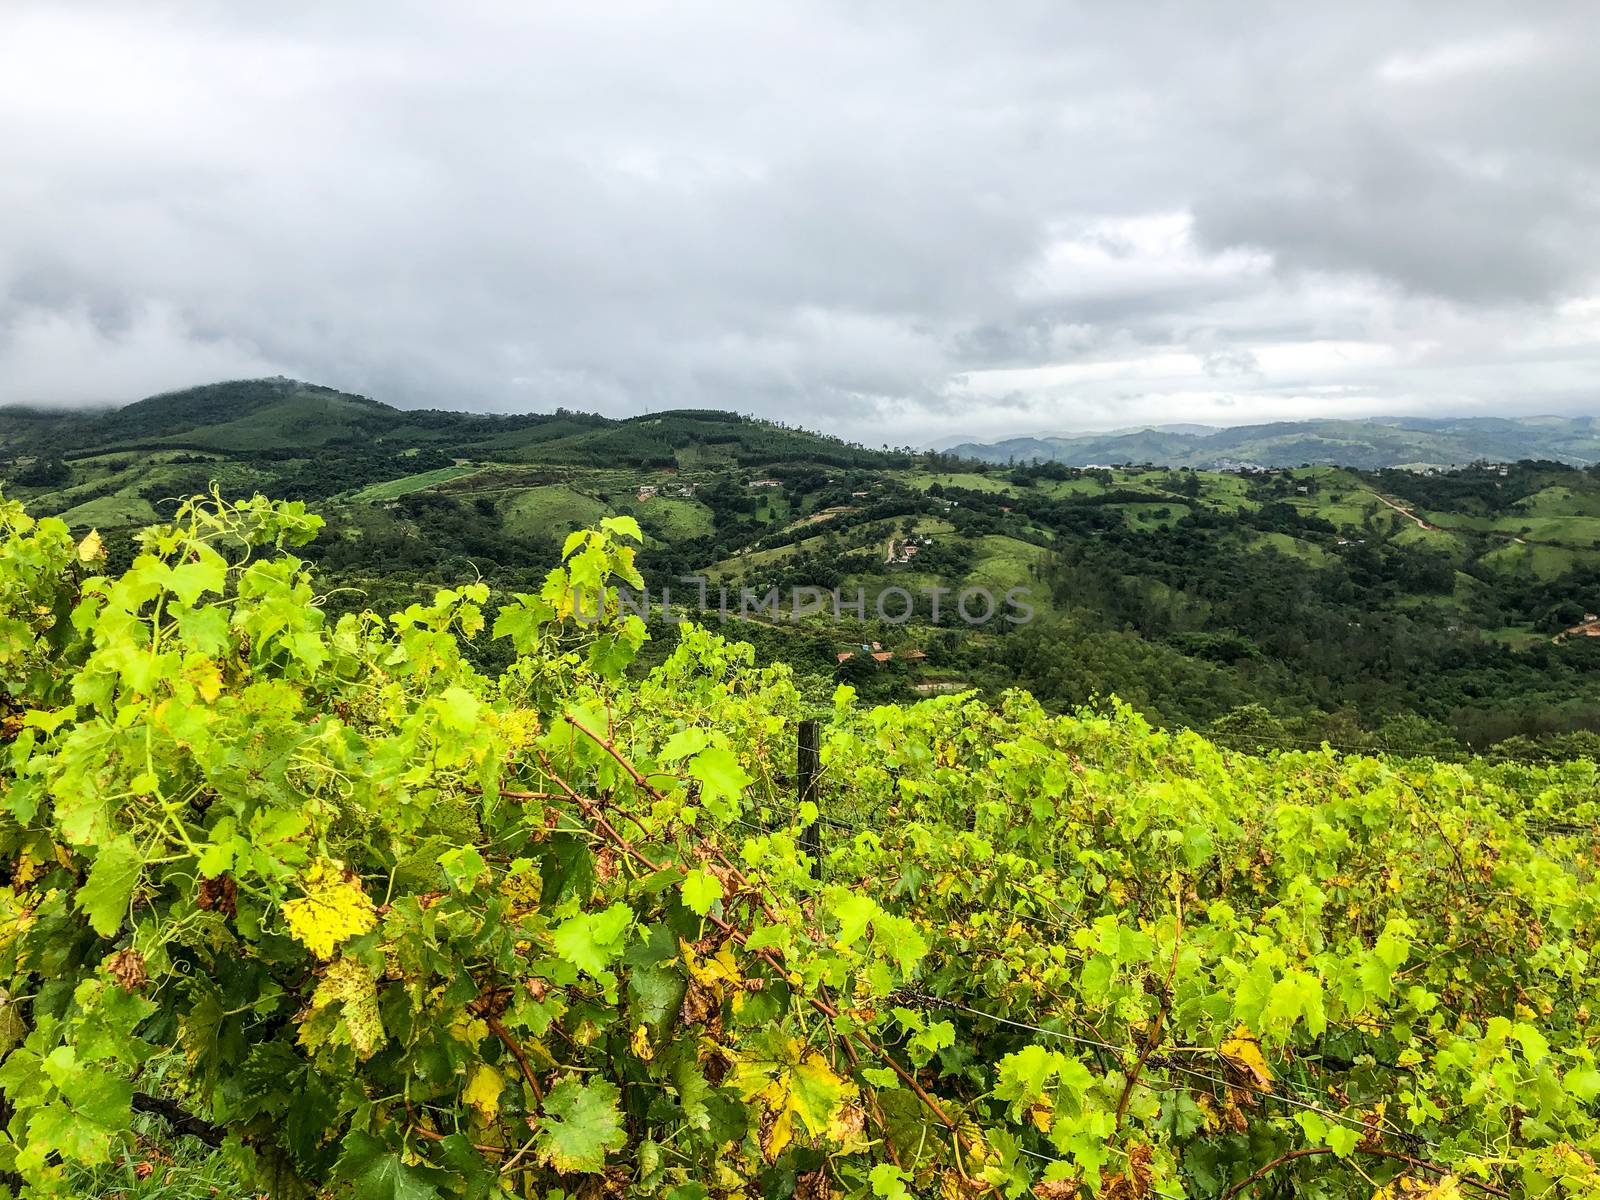 Close up of vineyards in the mountain during cloudy raining season. Grapevines in the green hills. Vineyards for making wine grown in the valleys on rainy days and fog blowing through.